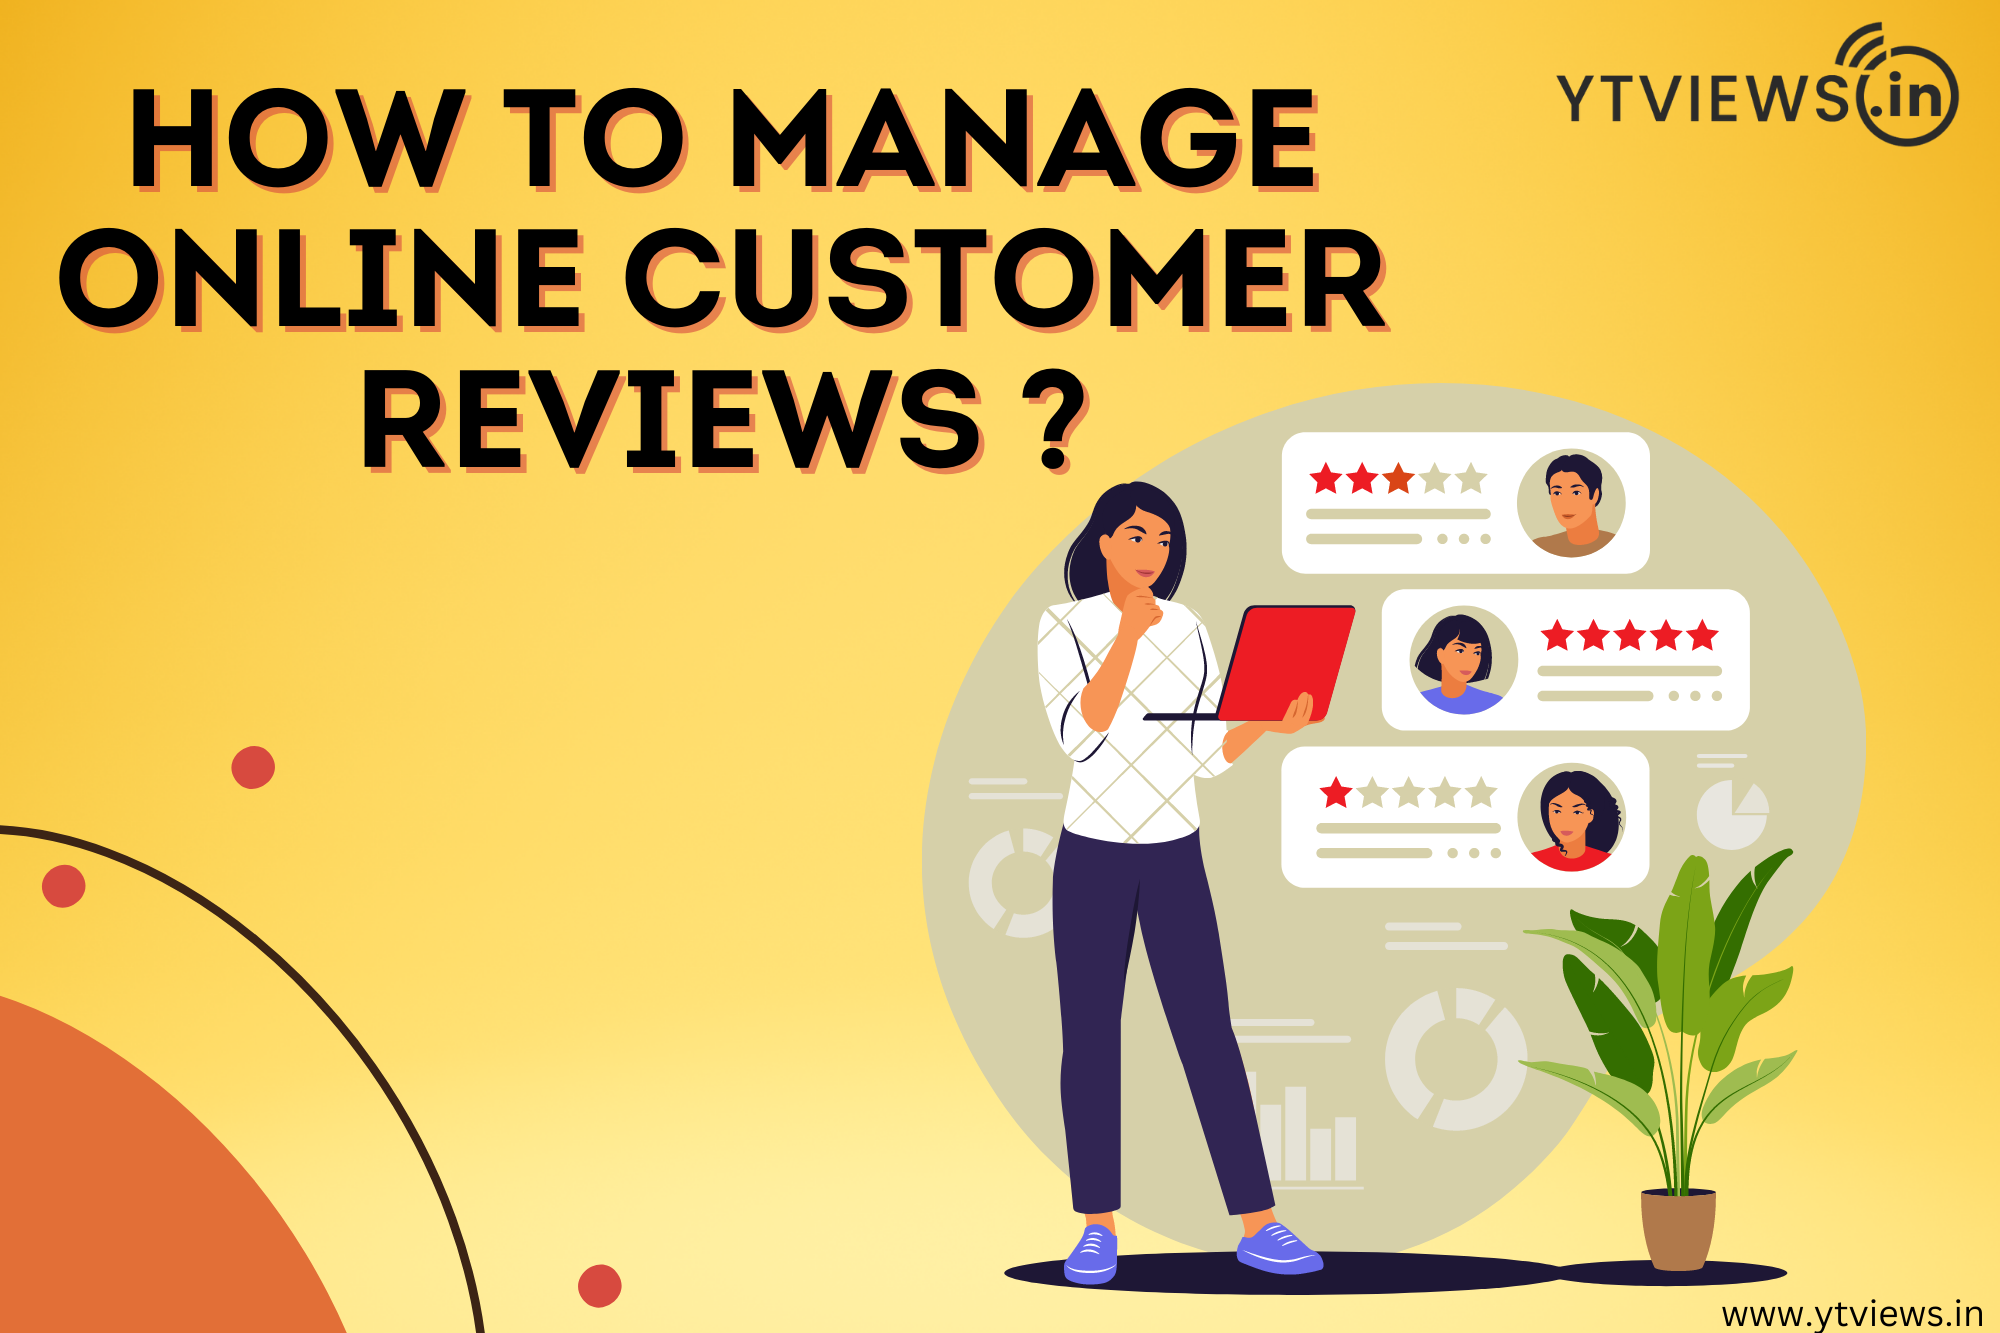 How to manage online customer reviews